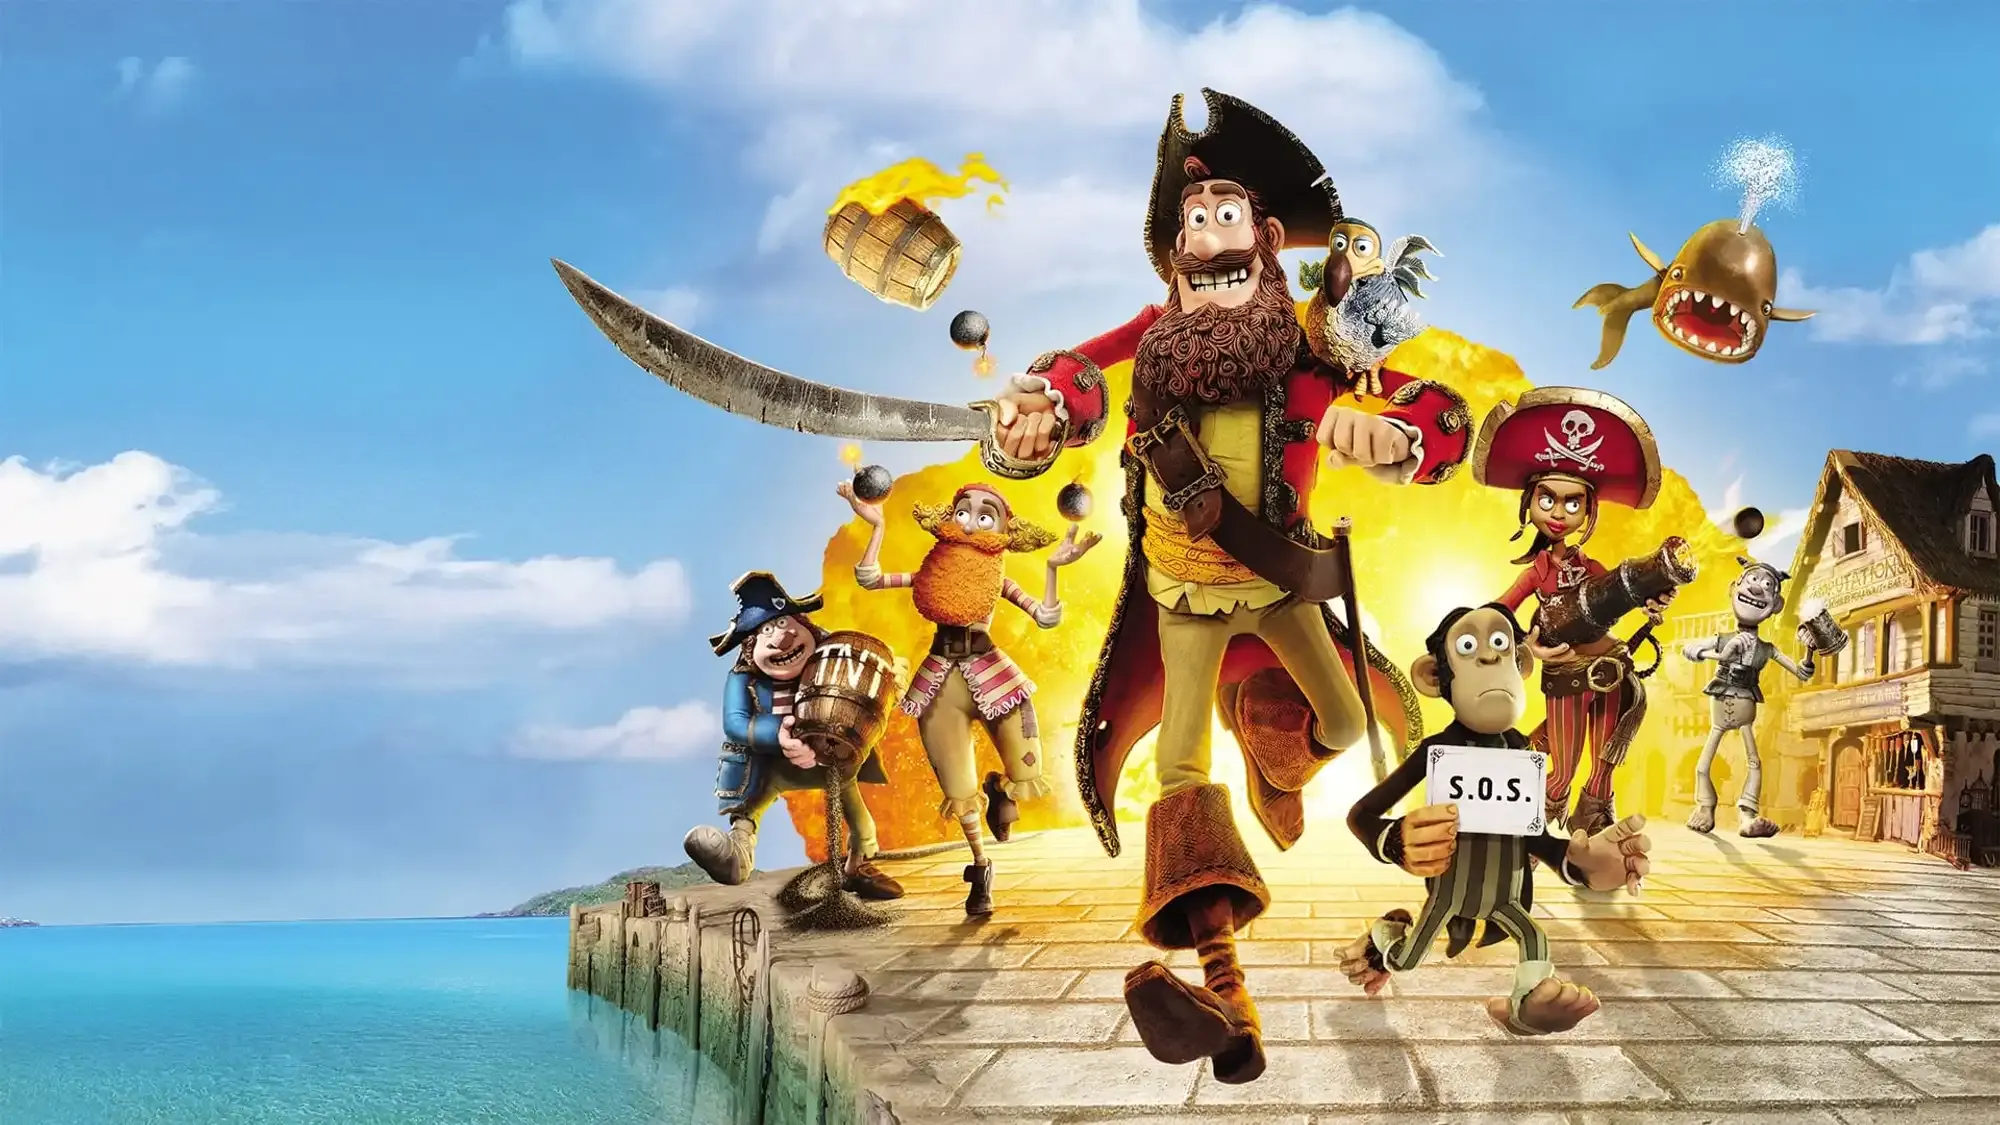 The Pirates! In an Adventure with Scientists! movie review